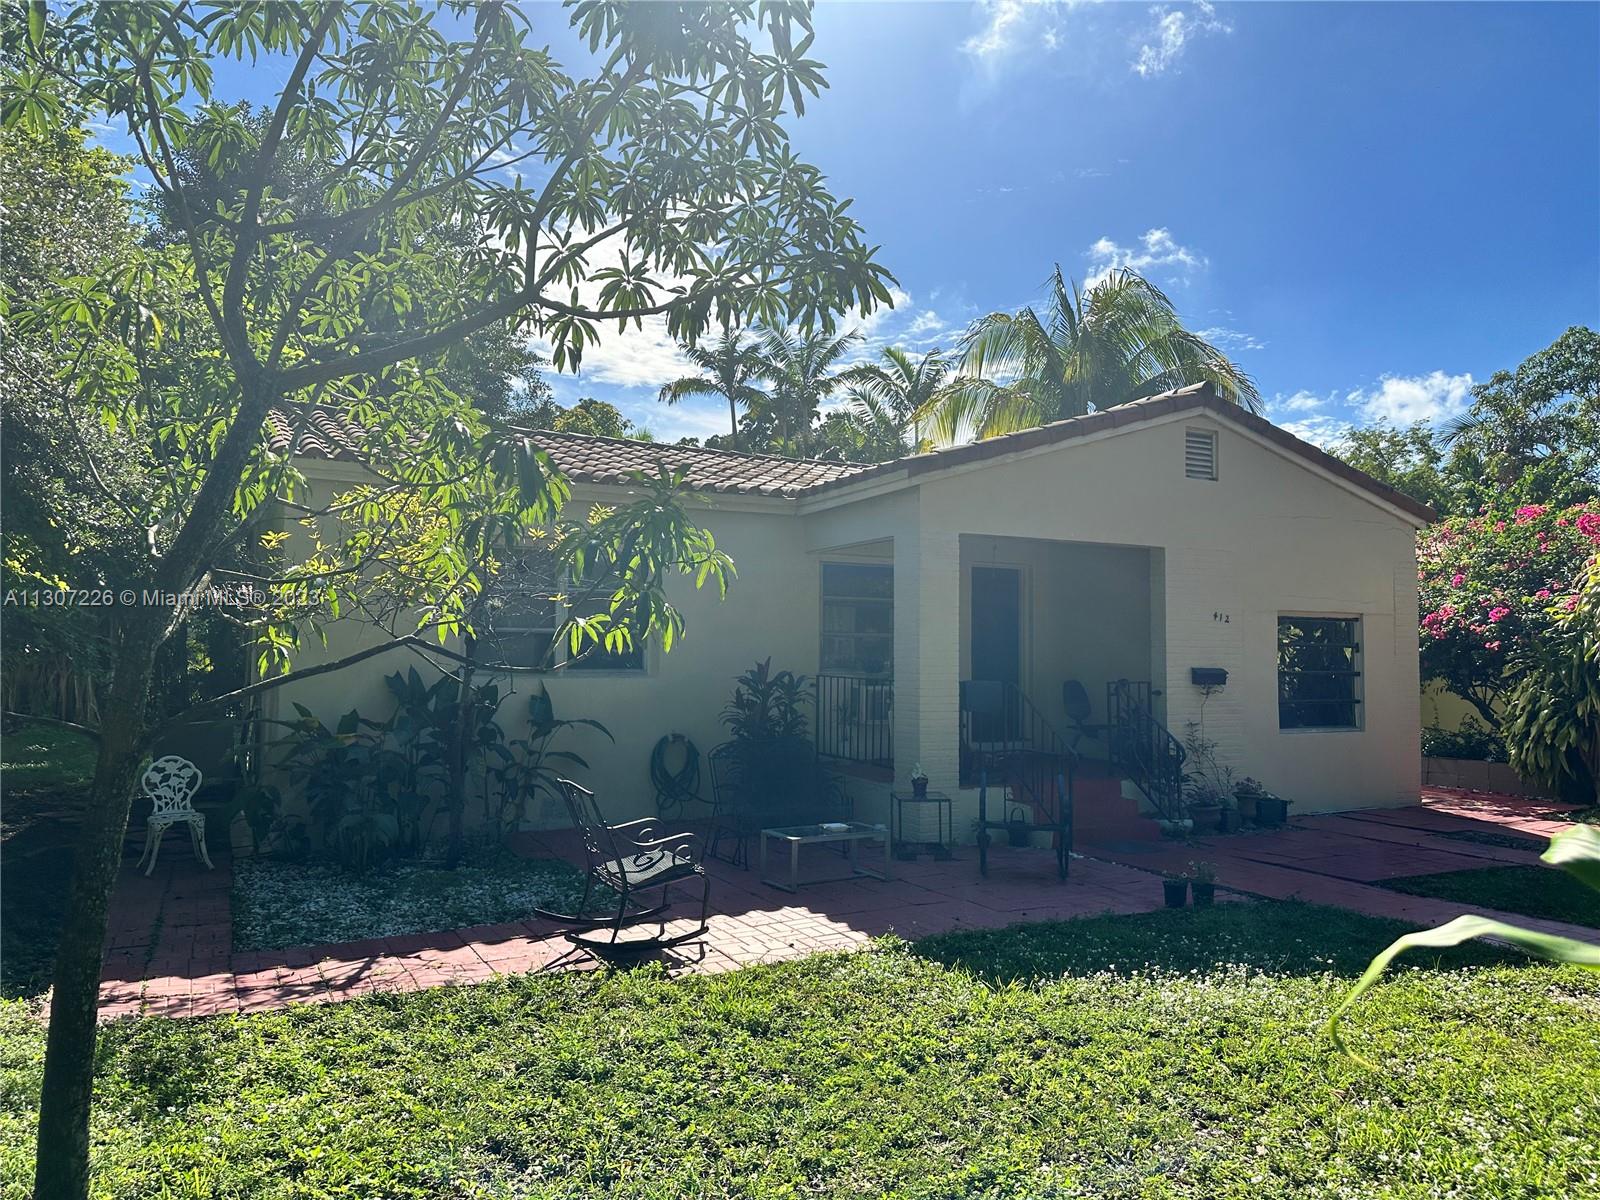 Photo 1 of 412 Cadagua Ave in Coral Gables - MLS A11307226